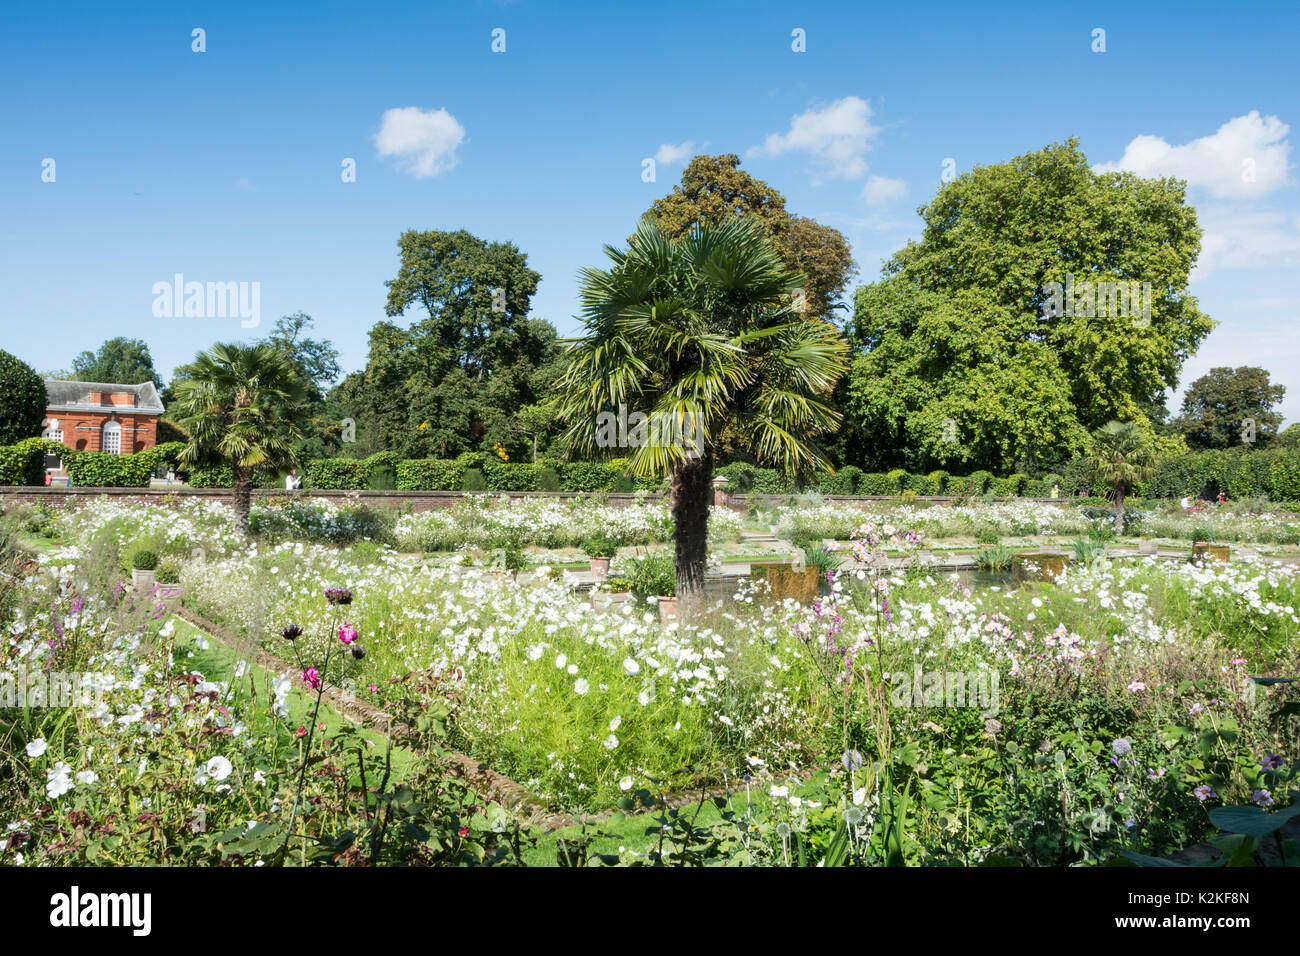 London, UK. 31st Aug, 2017. Well wishers visit the White Garden at Kensington Palace to commemorate and pay tribute to Princess Diana, twenty years after her death. Credit: Benjamin John/Alamy Live News Stock Photo